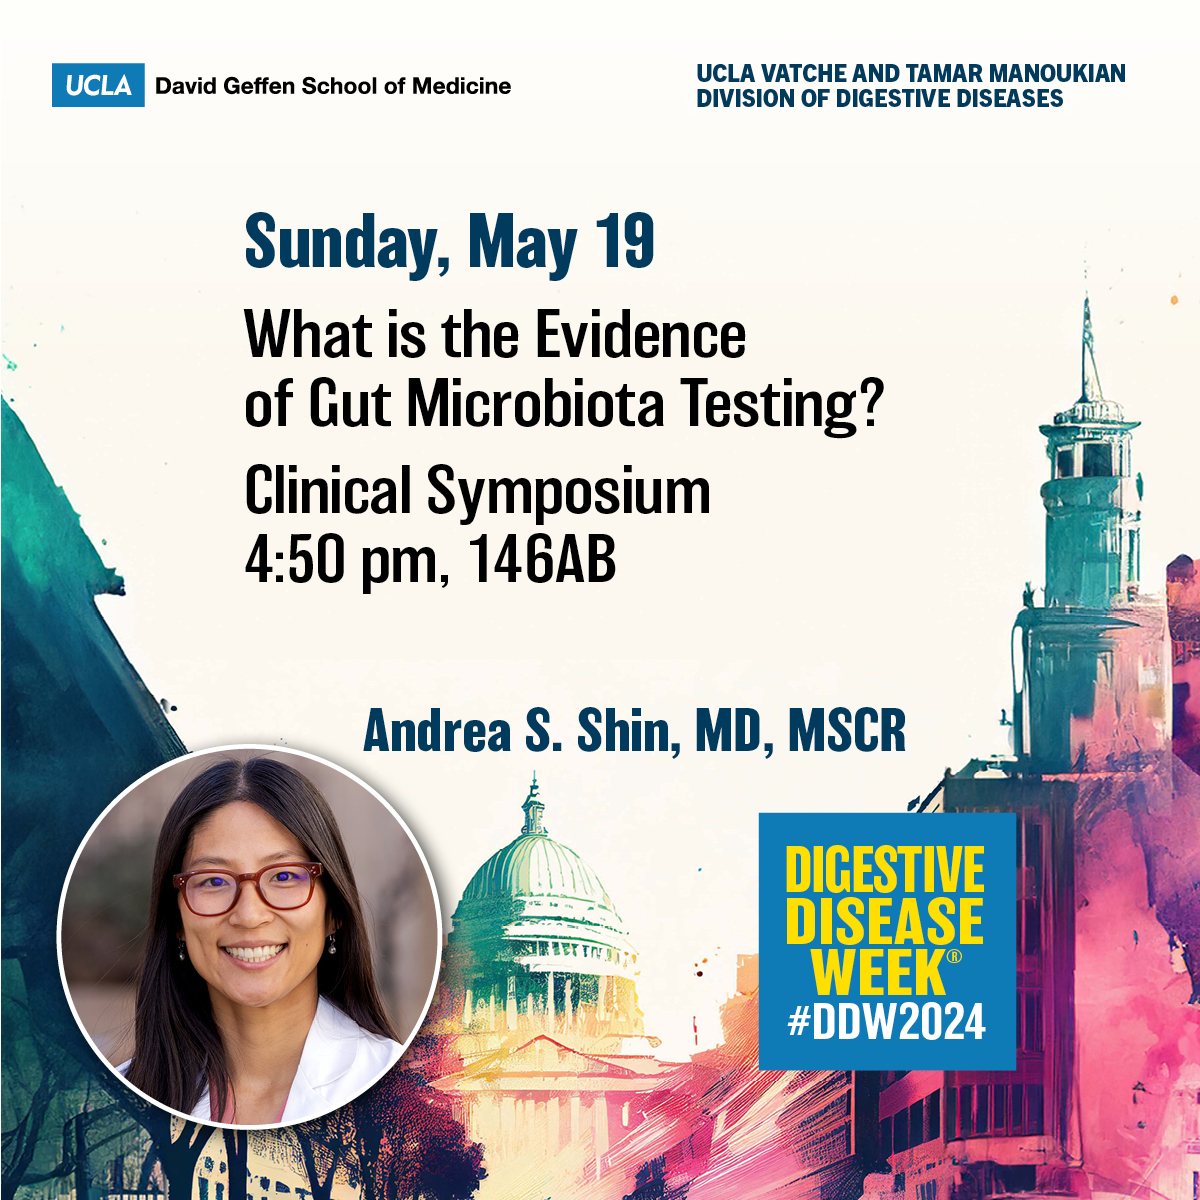 Join us at #DDW2024 for ➡️What is the Evidence of Gut Microbiota Testing?

🗣️Andrea S. Shin, MD, MSCR (@AndreaShin_GI)
🔸Clinical Symposium & Panel Discussion
🔸Sunday, May 19, 4:50 pm, 146AB